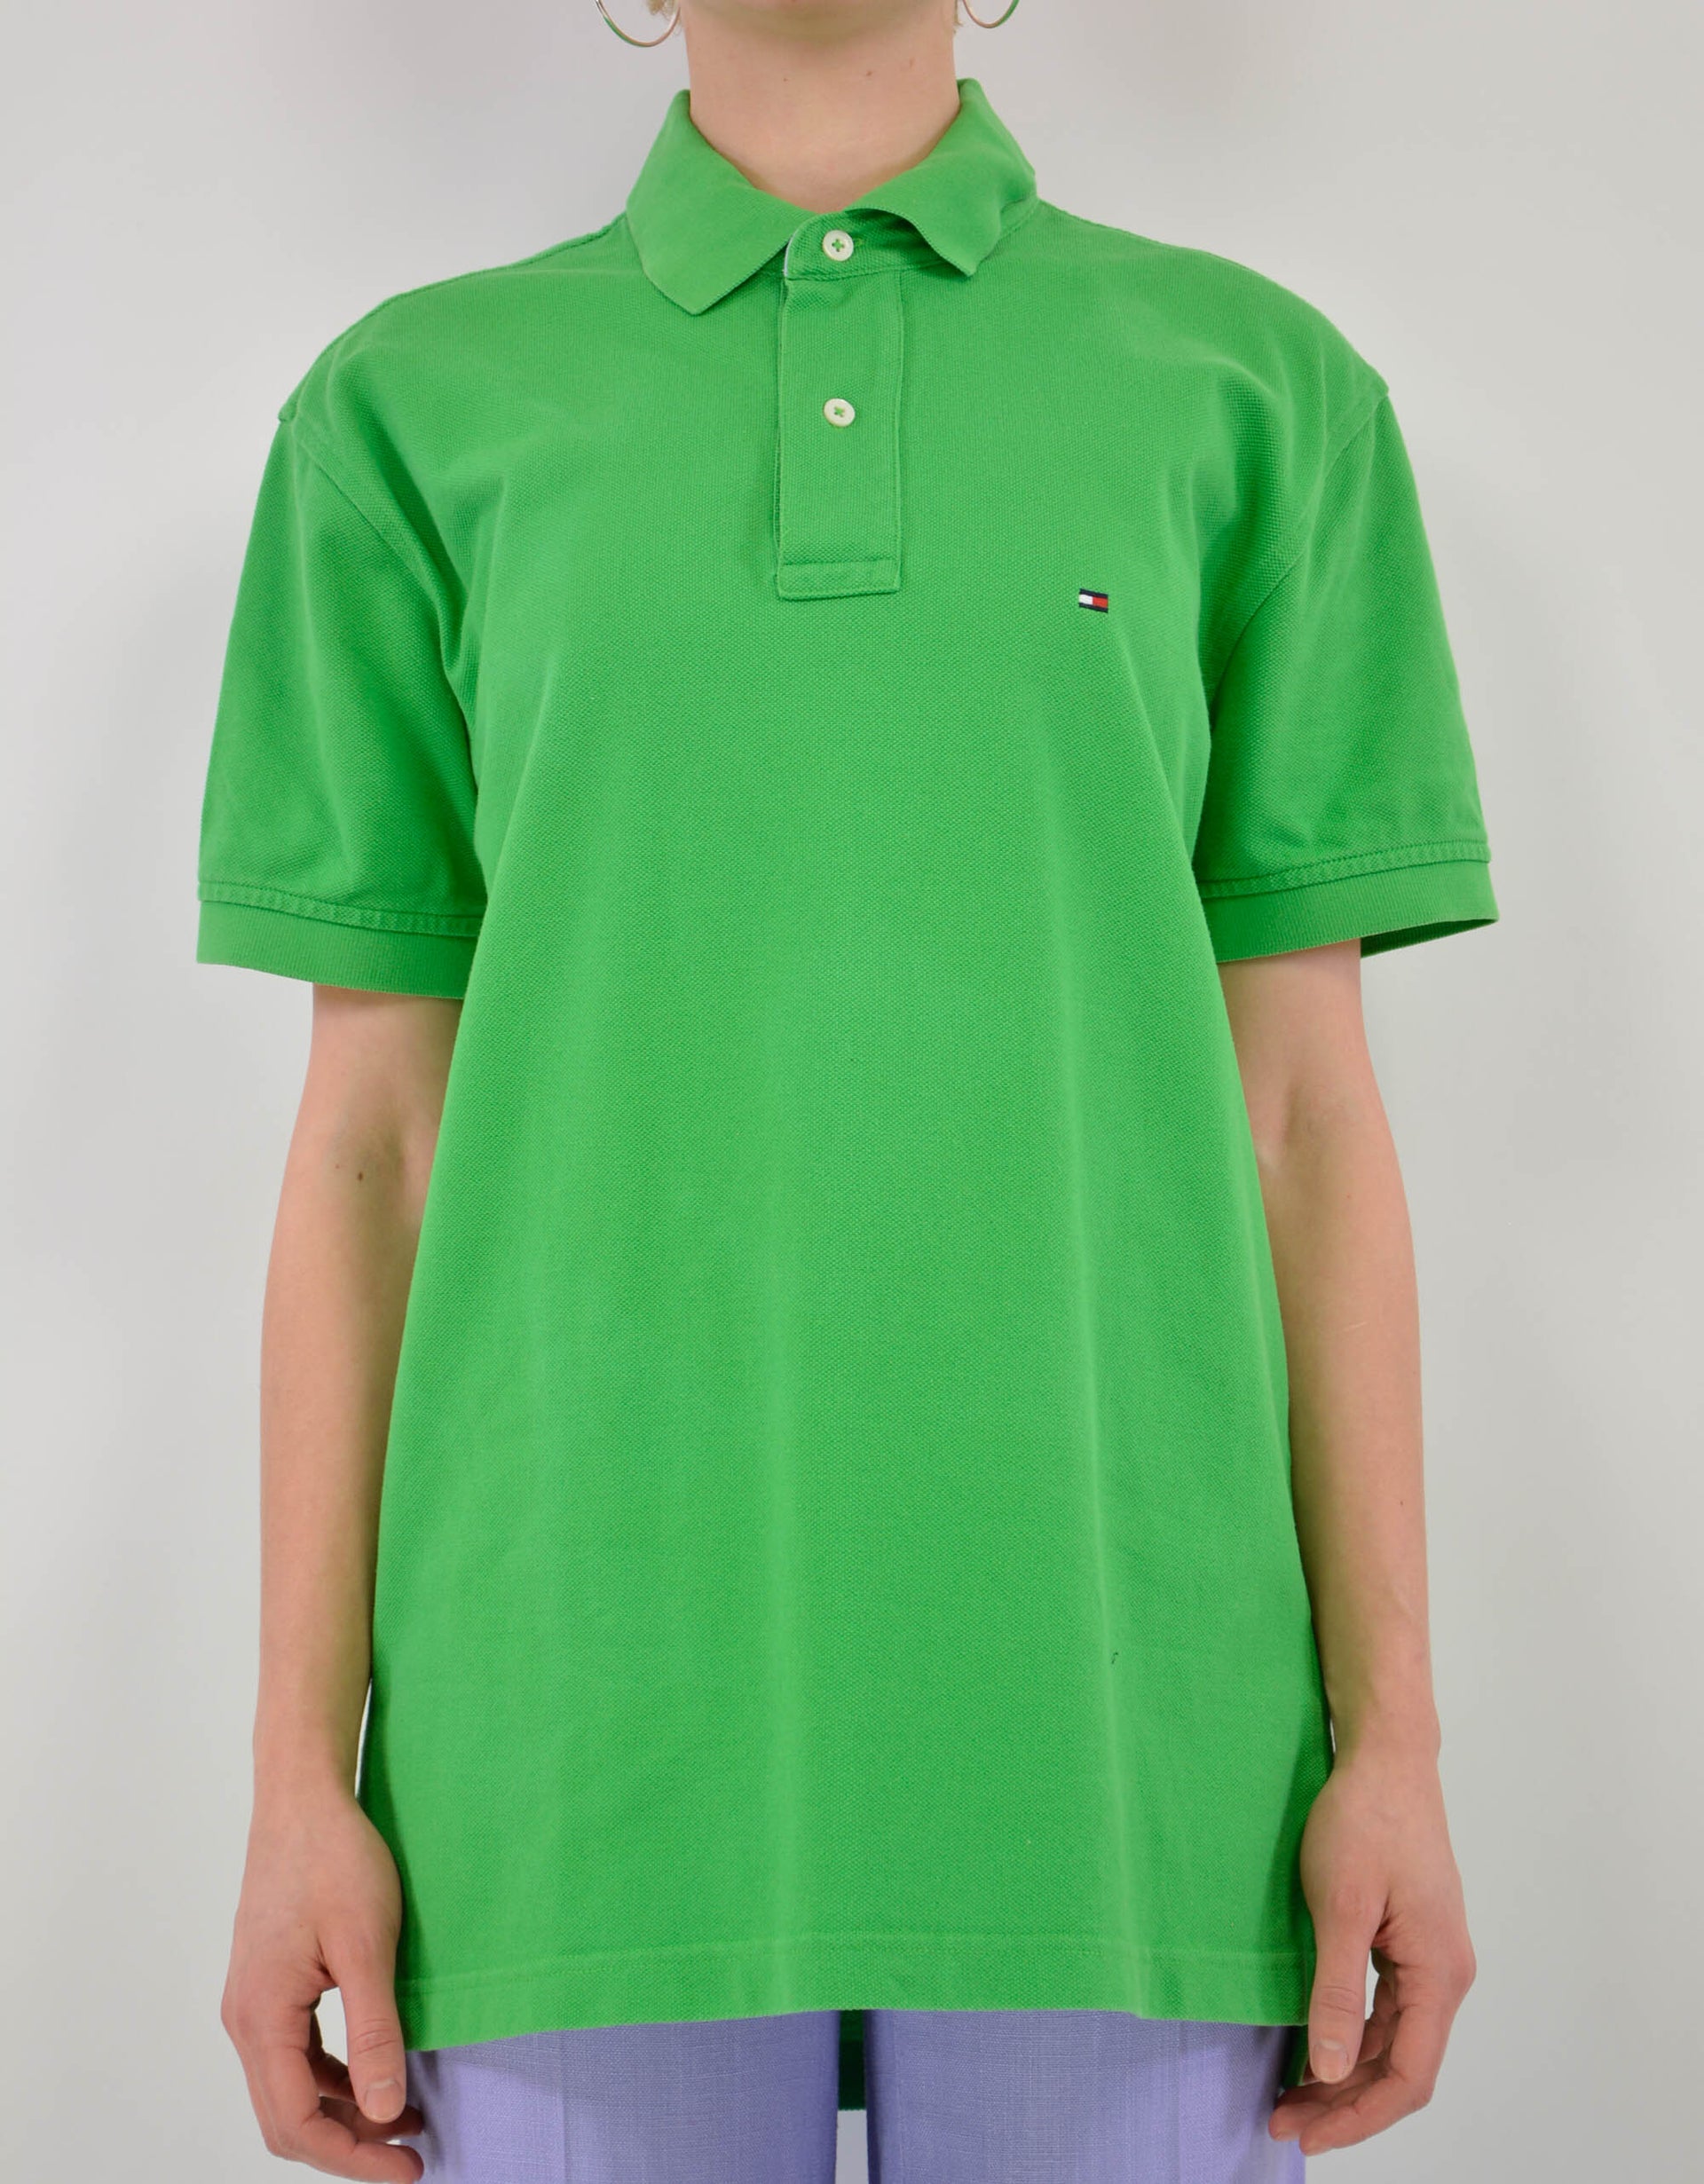 Tommy polo - PICKNWEIGHT - VINTAGE KILO STORE